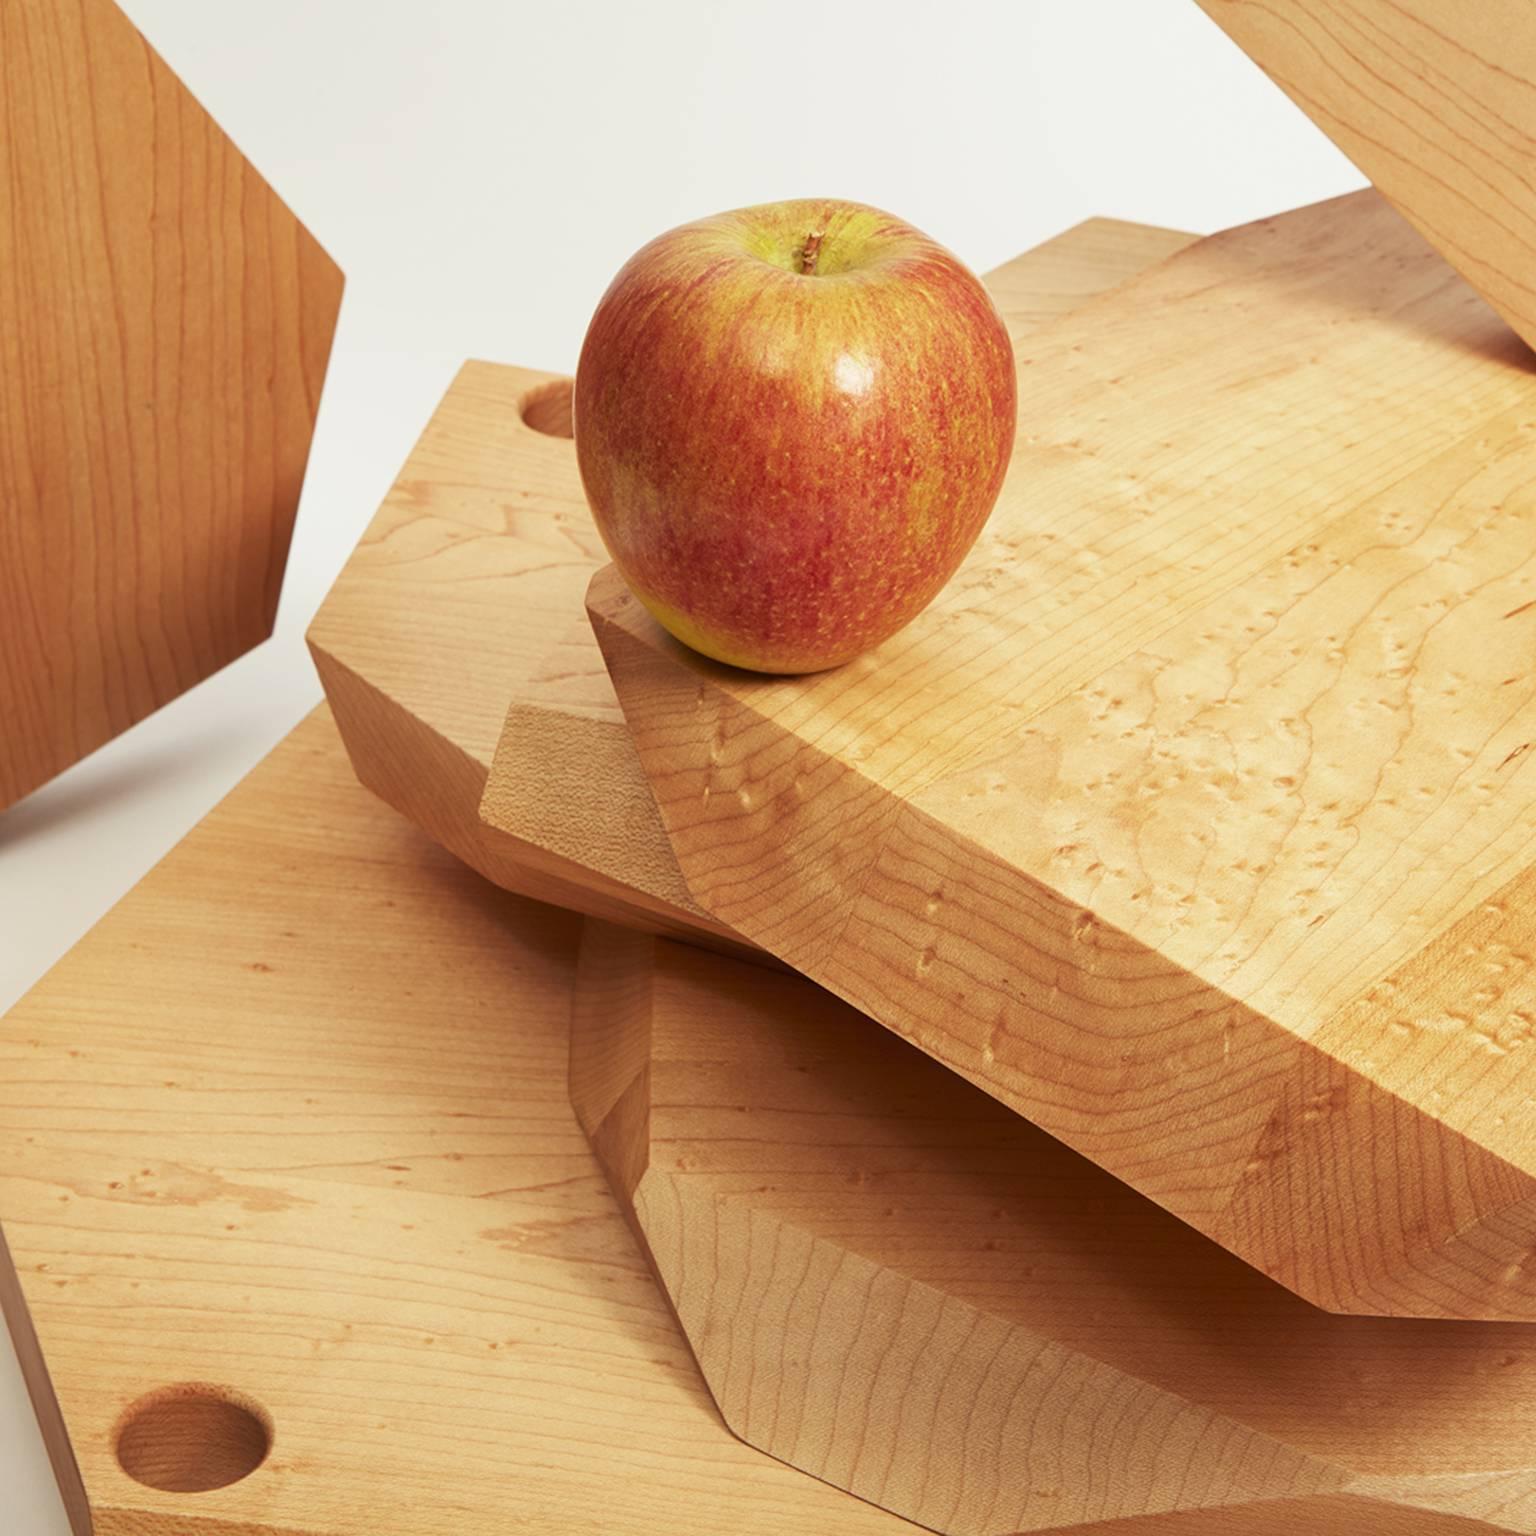 Handcrafted in Brooklyn, Noah Spencer carefully selects wood with beautiful grain patterns to create each Slab Cutting Board. These sculptural and functional objects are great for simple kitchen cutting and artful food presentation. 

Materials: